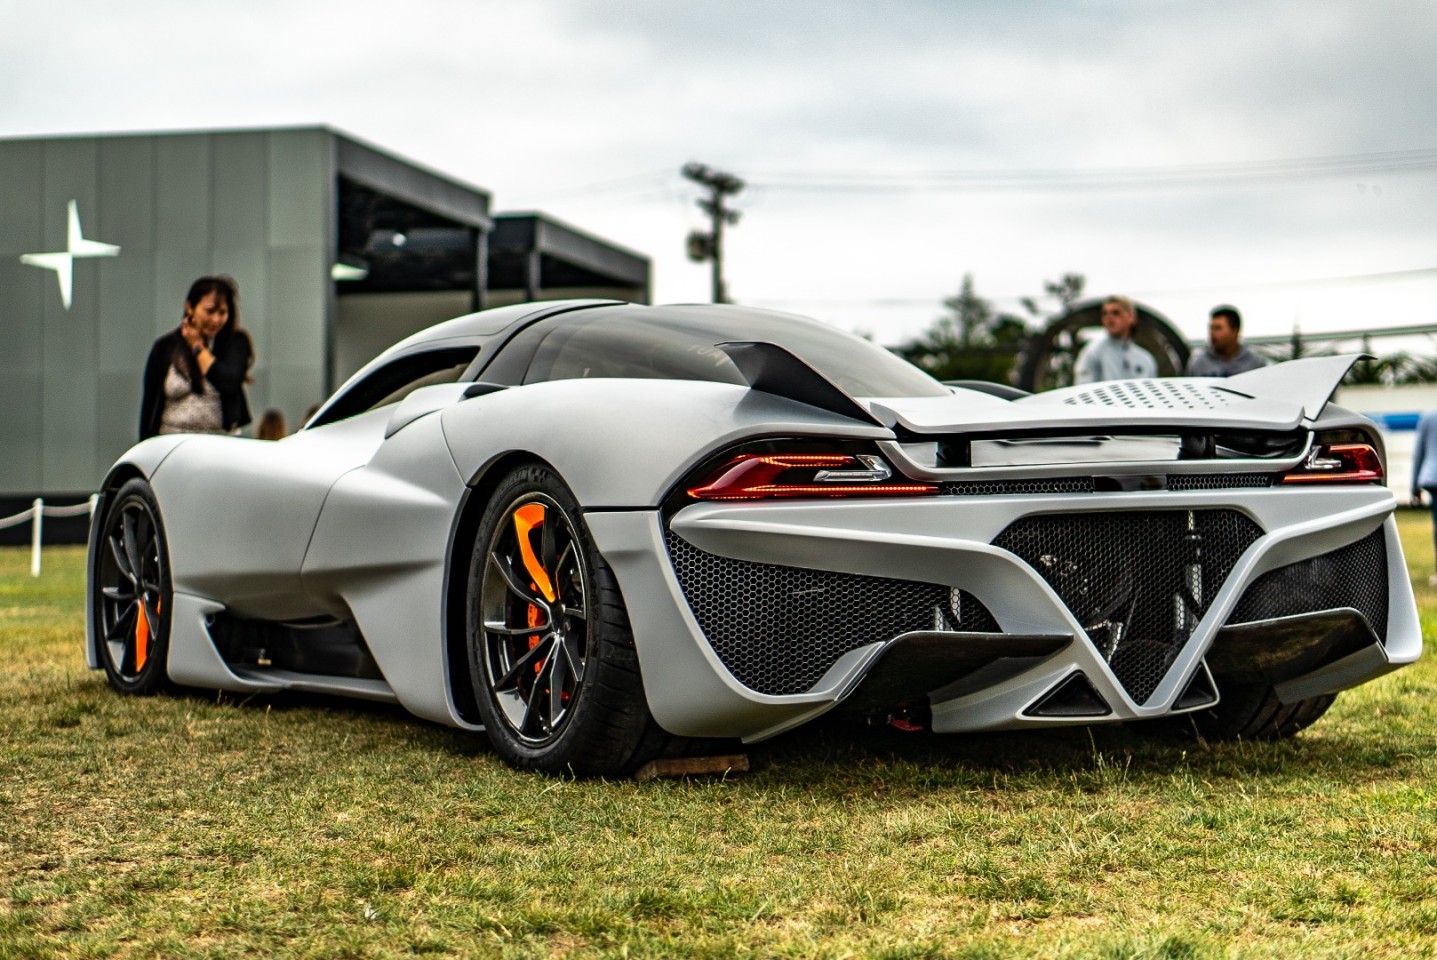 SSC debuted the Tuatara in pre-production form at last year's Pebble Beach Concours d'Elegance